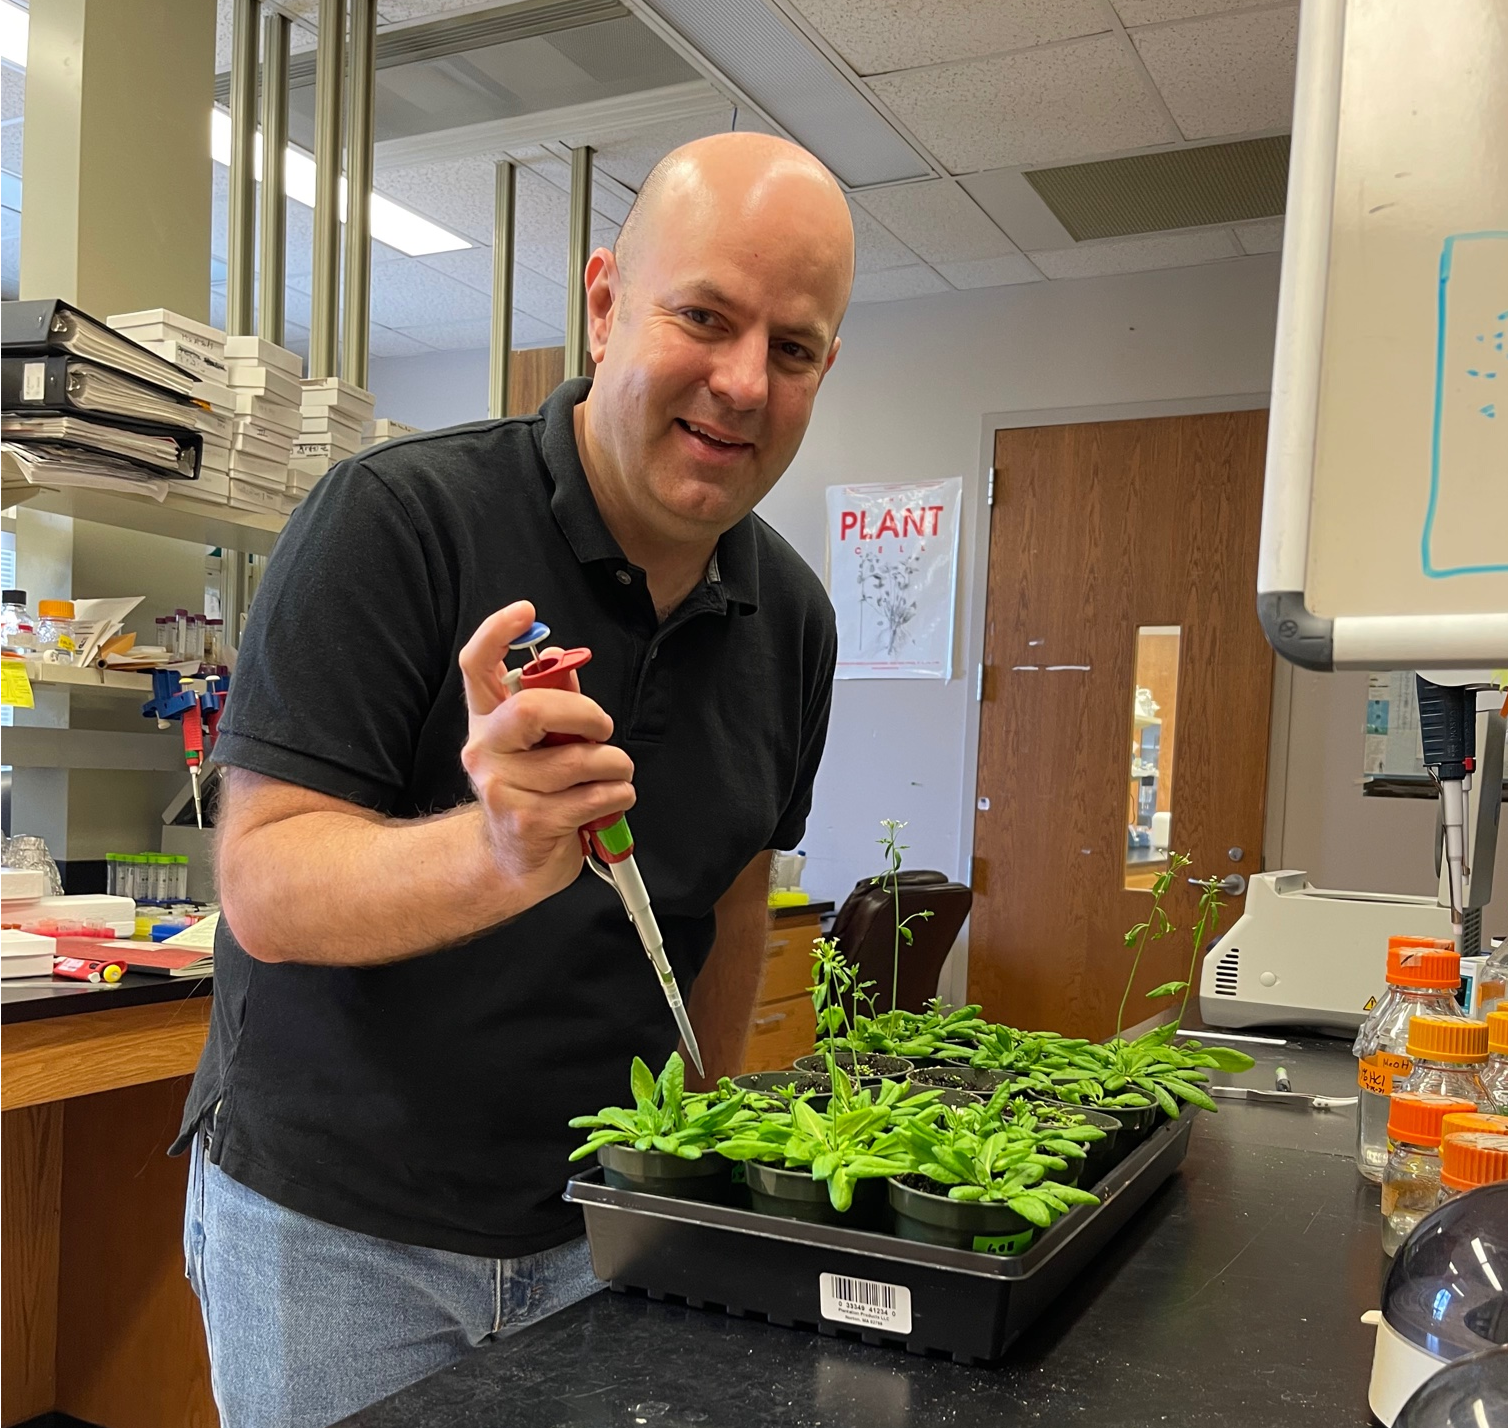 Aaron applying stressors to the Arabidopsis plant in his lab in the Rouse Life Science Building.